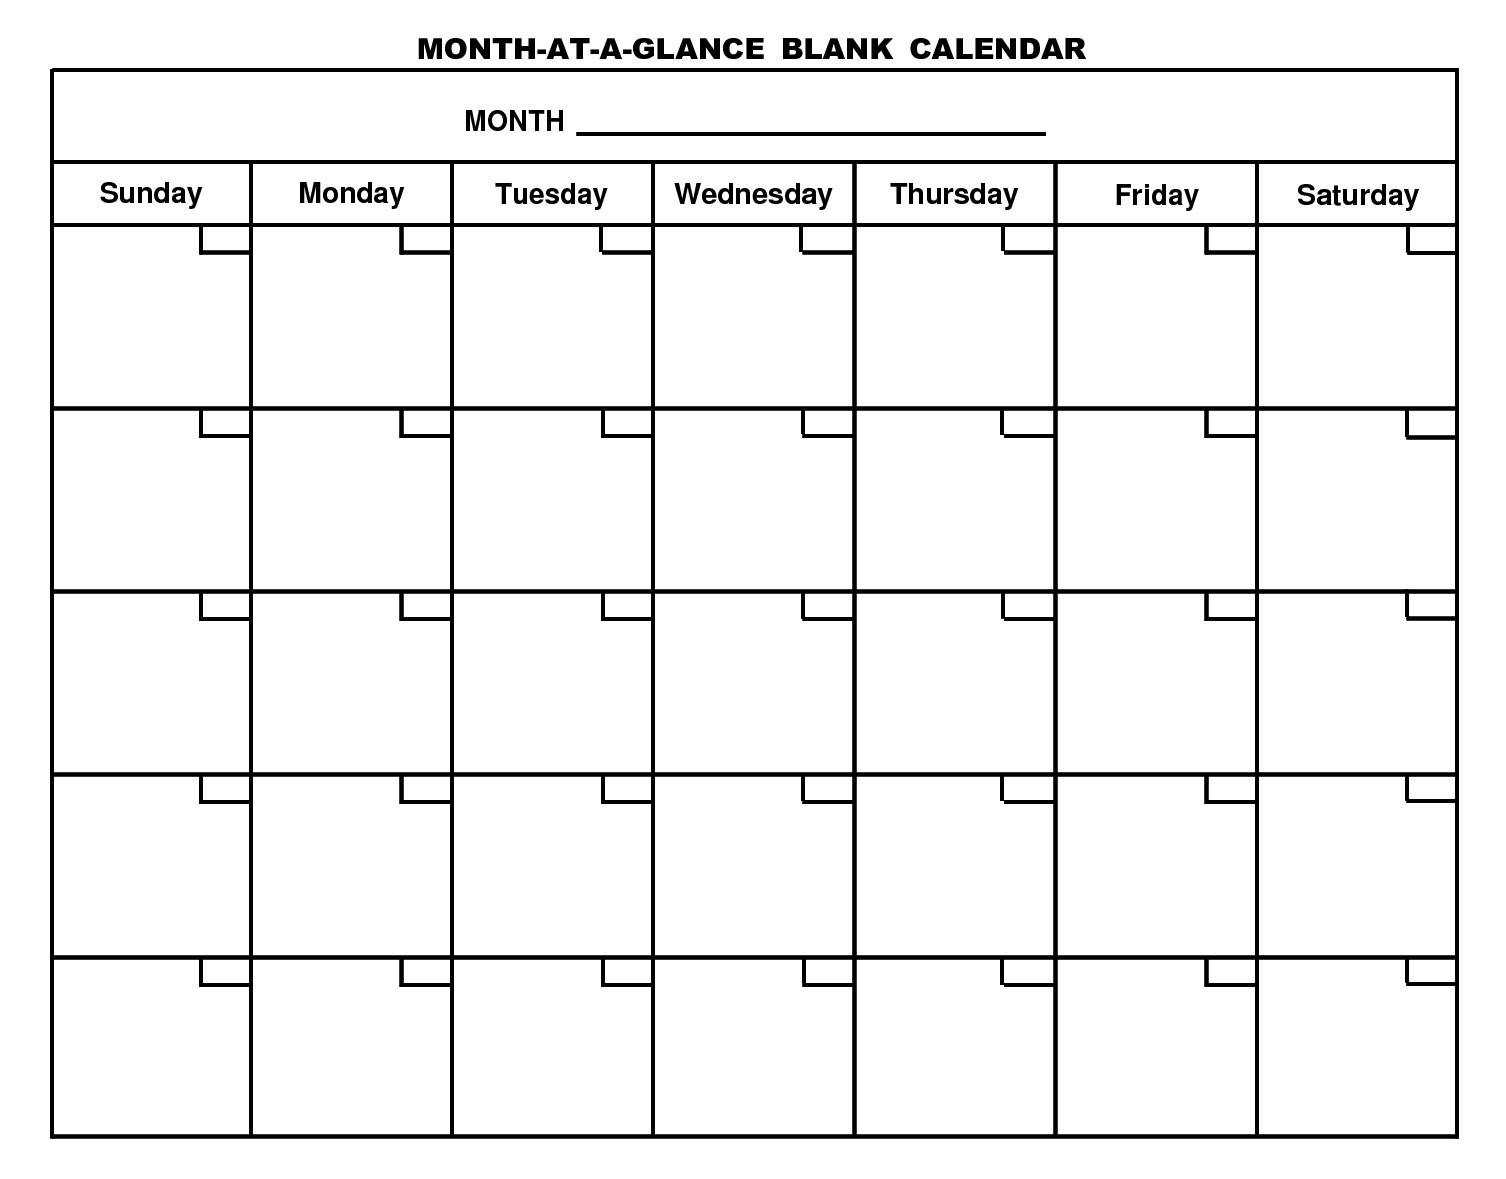 Month At A Glance Blank Calendar Template - Dalep.midnightpig.co Within Month At A Glance Blank Calendar Template